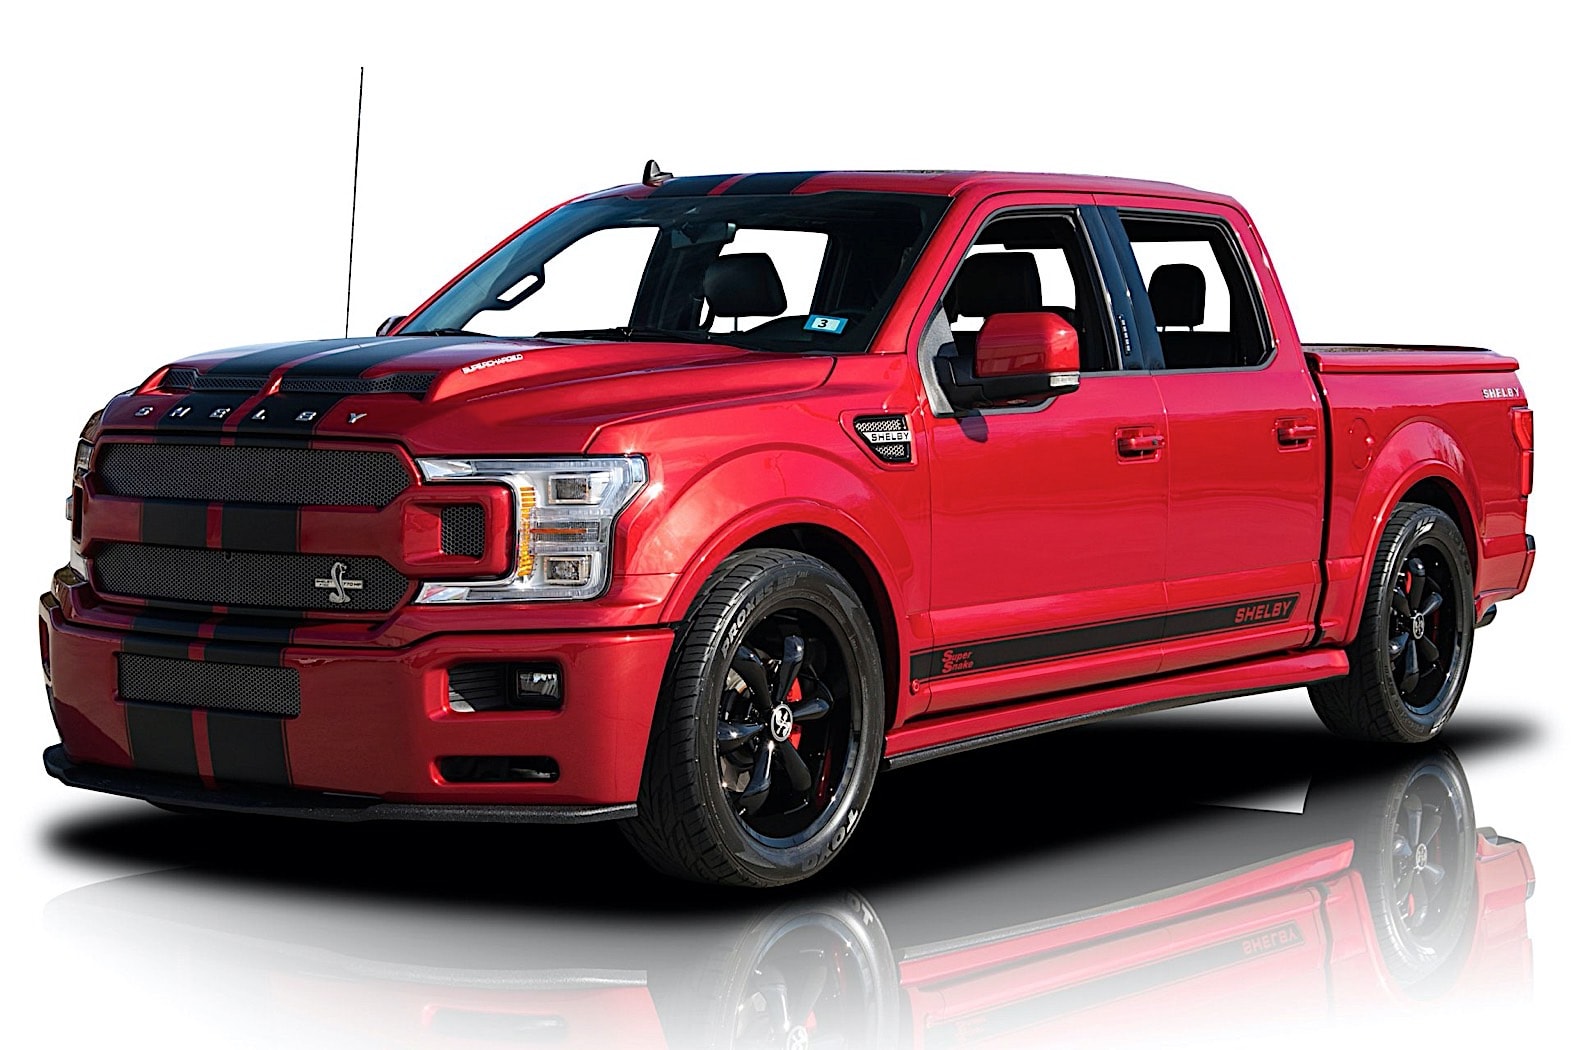 One Got Tired of a 2020 Shelby F150 Super Snake Fast, Selling It for